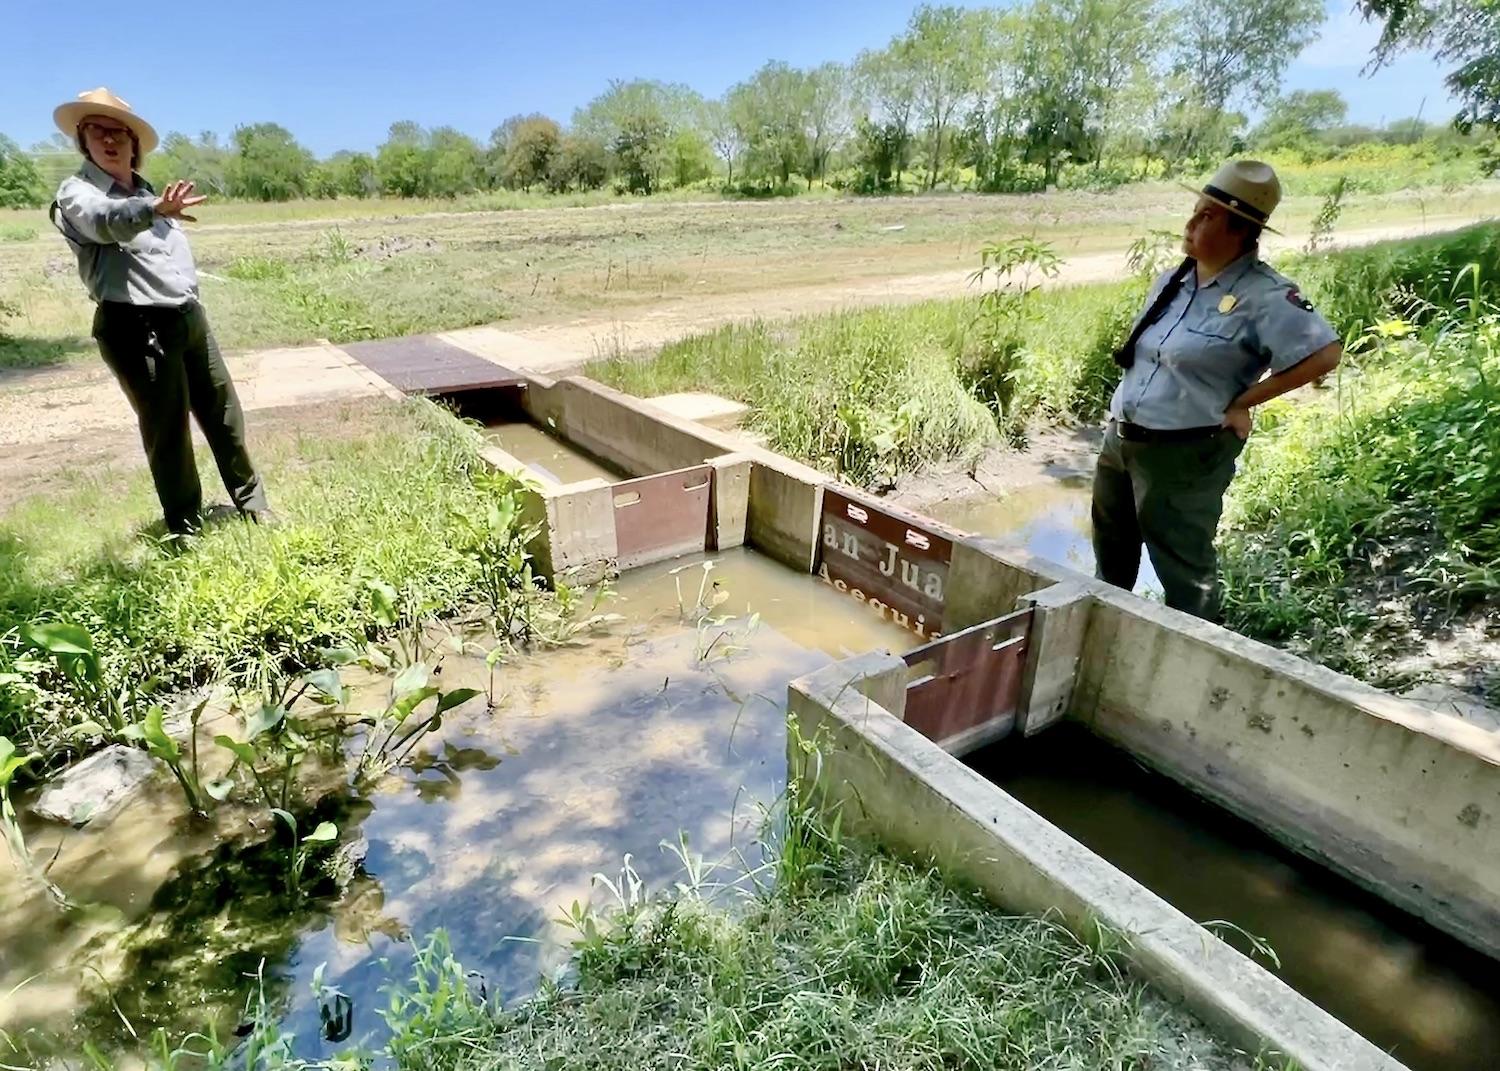 At Mission San Juan, Superintendent Christine Jacobs and Ranger Destiny Gardea stand at the sluice gates of an ancient acequia that is used to water fields farmed by the San Antonio Food Bank.